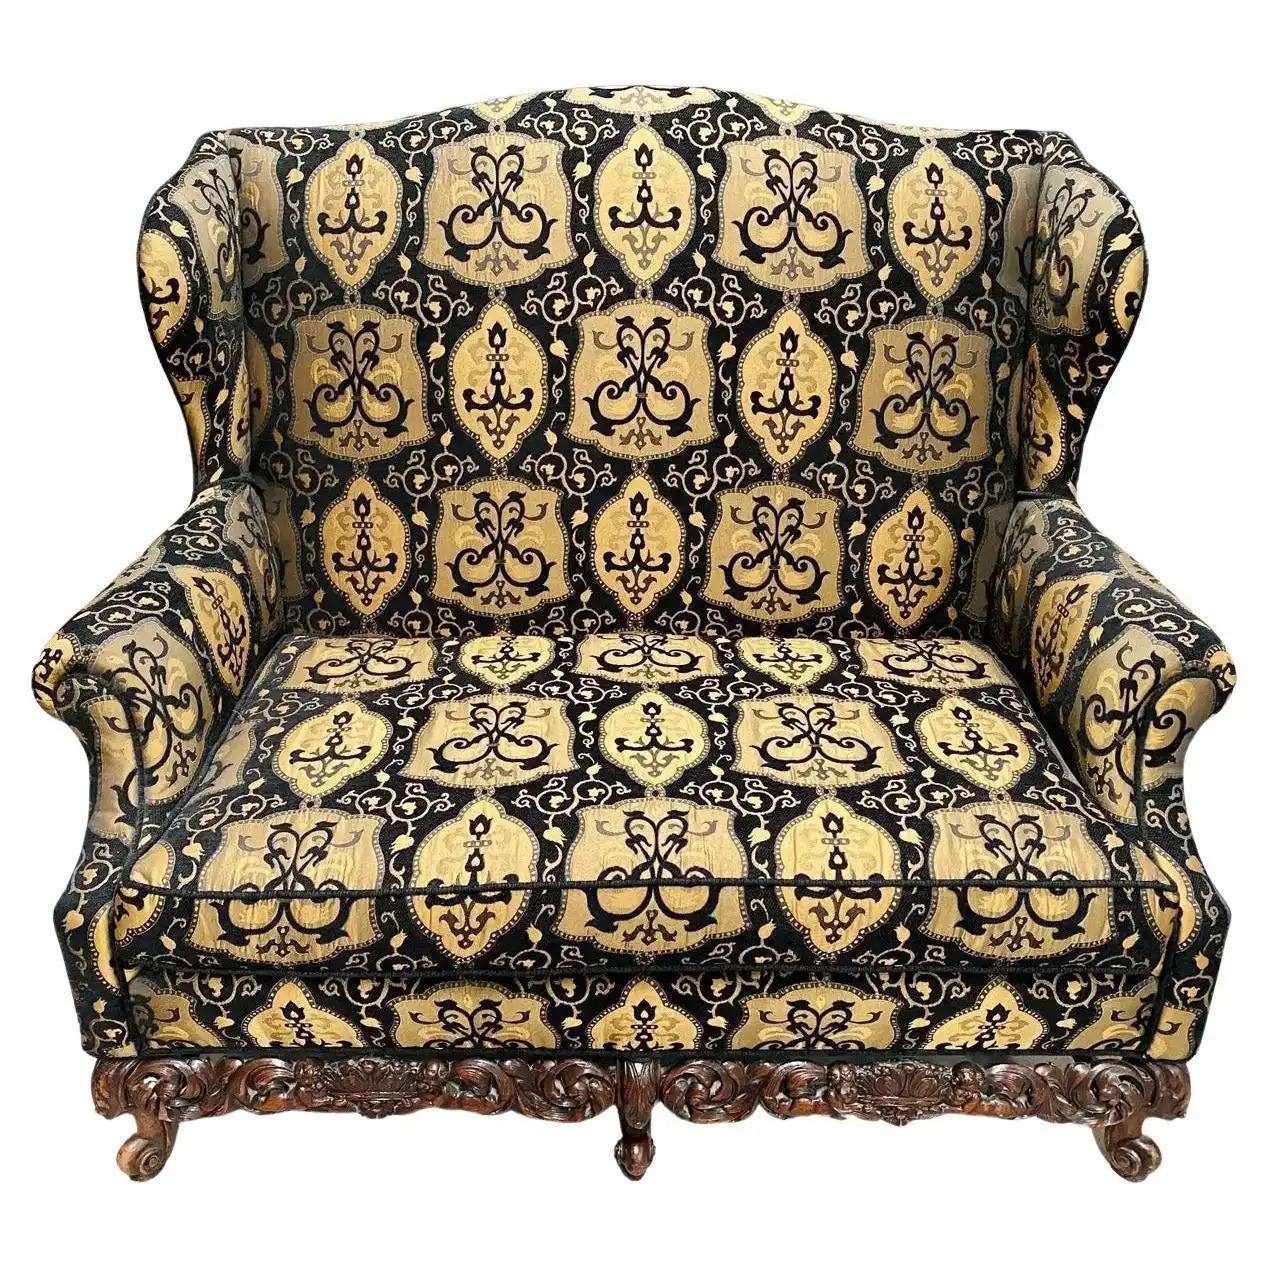 19th-early 20th century settees / canapes or loveseats in Rococo style having a fine Fabric. This is simply the finest pair of wonderfully covered and carved oversized settees or canapes anyone could wish to fine. The detailed carvings on the lower